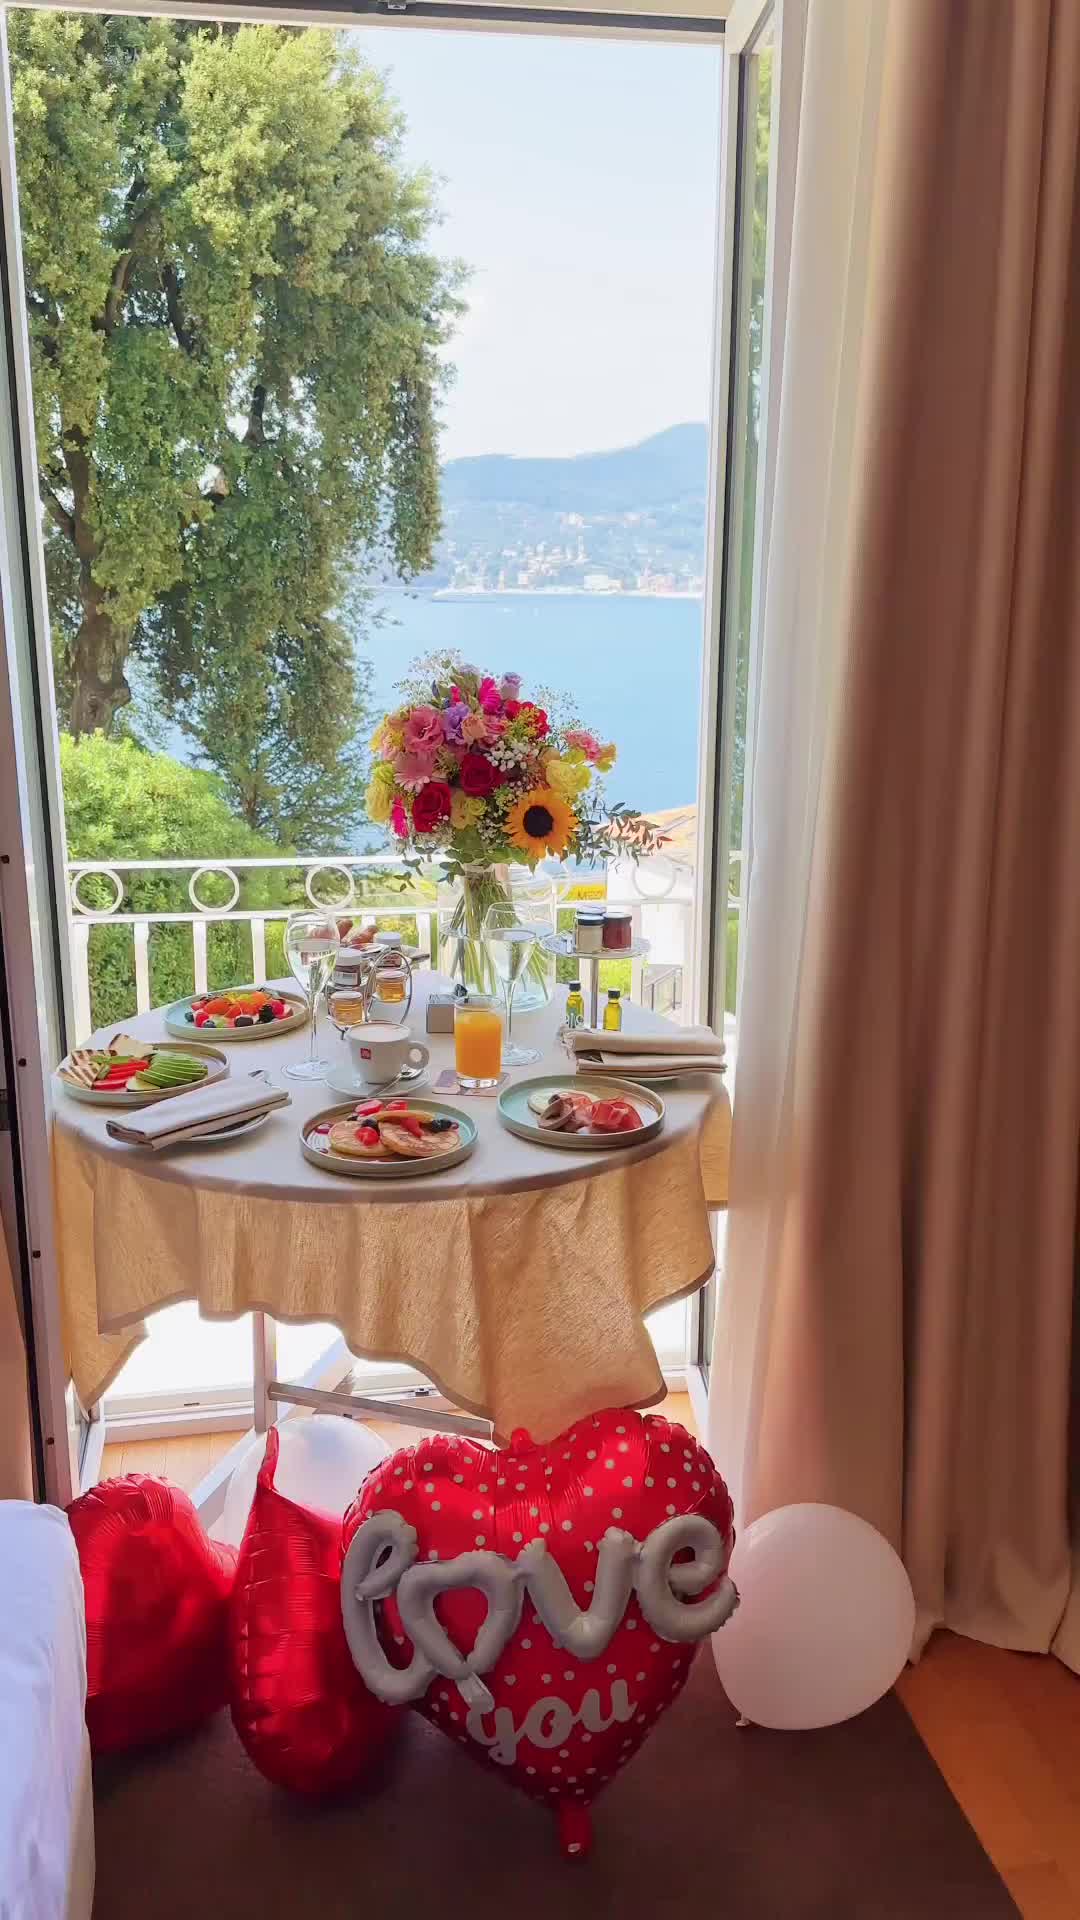 Breakfast with a View at Grand Hotel Bristol, Italy